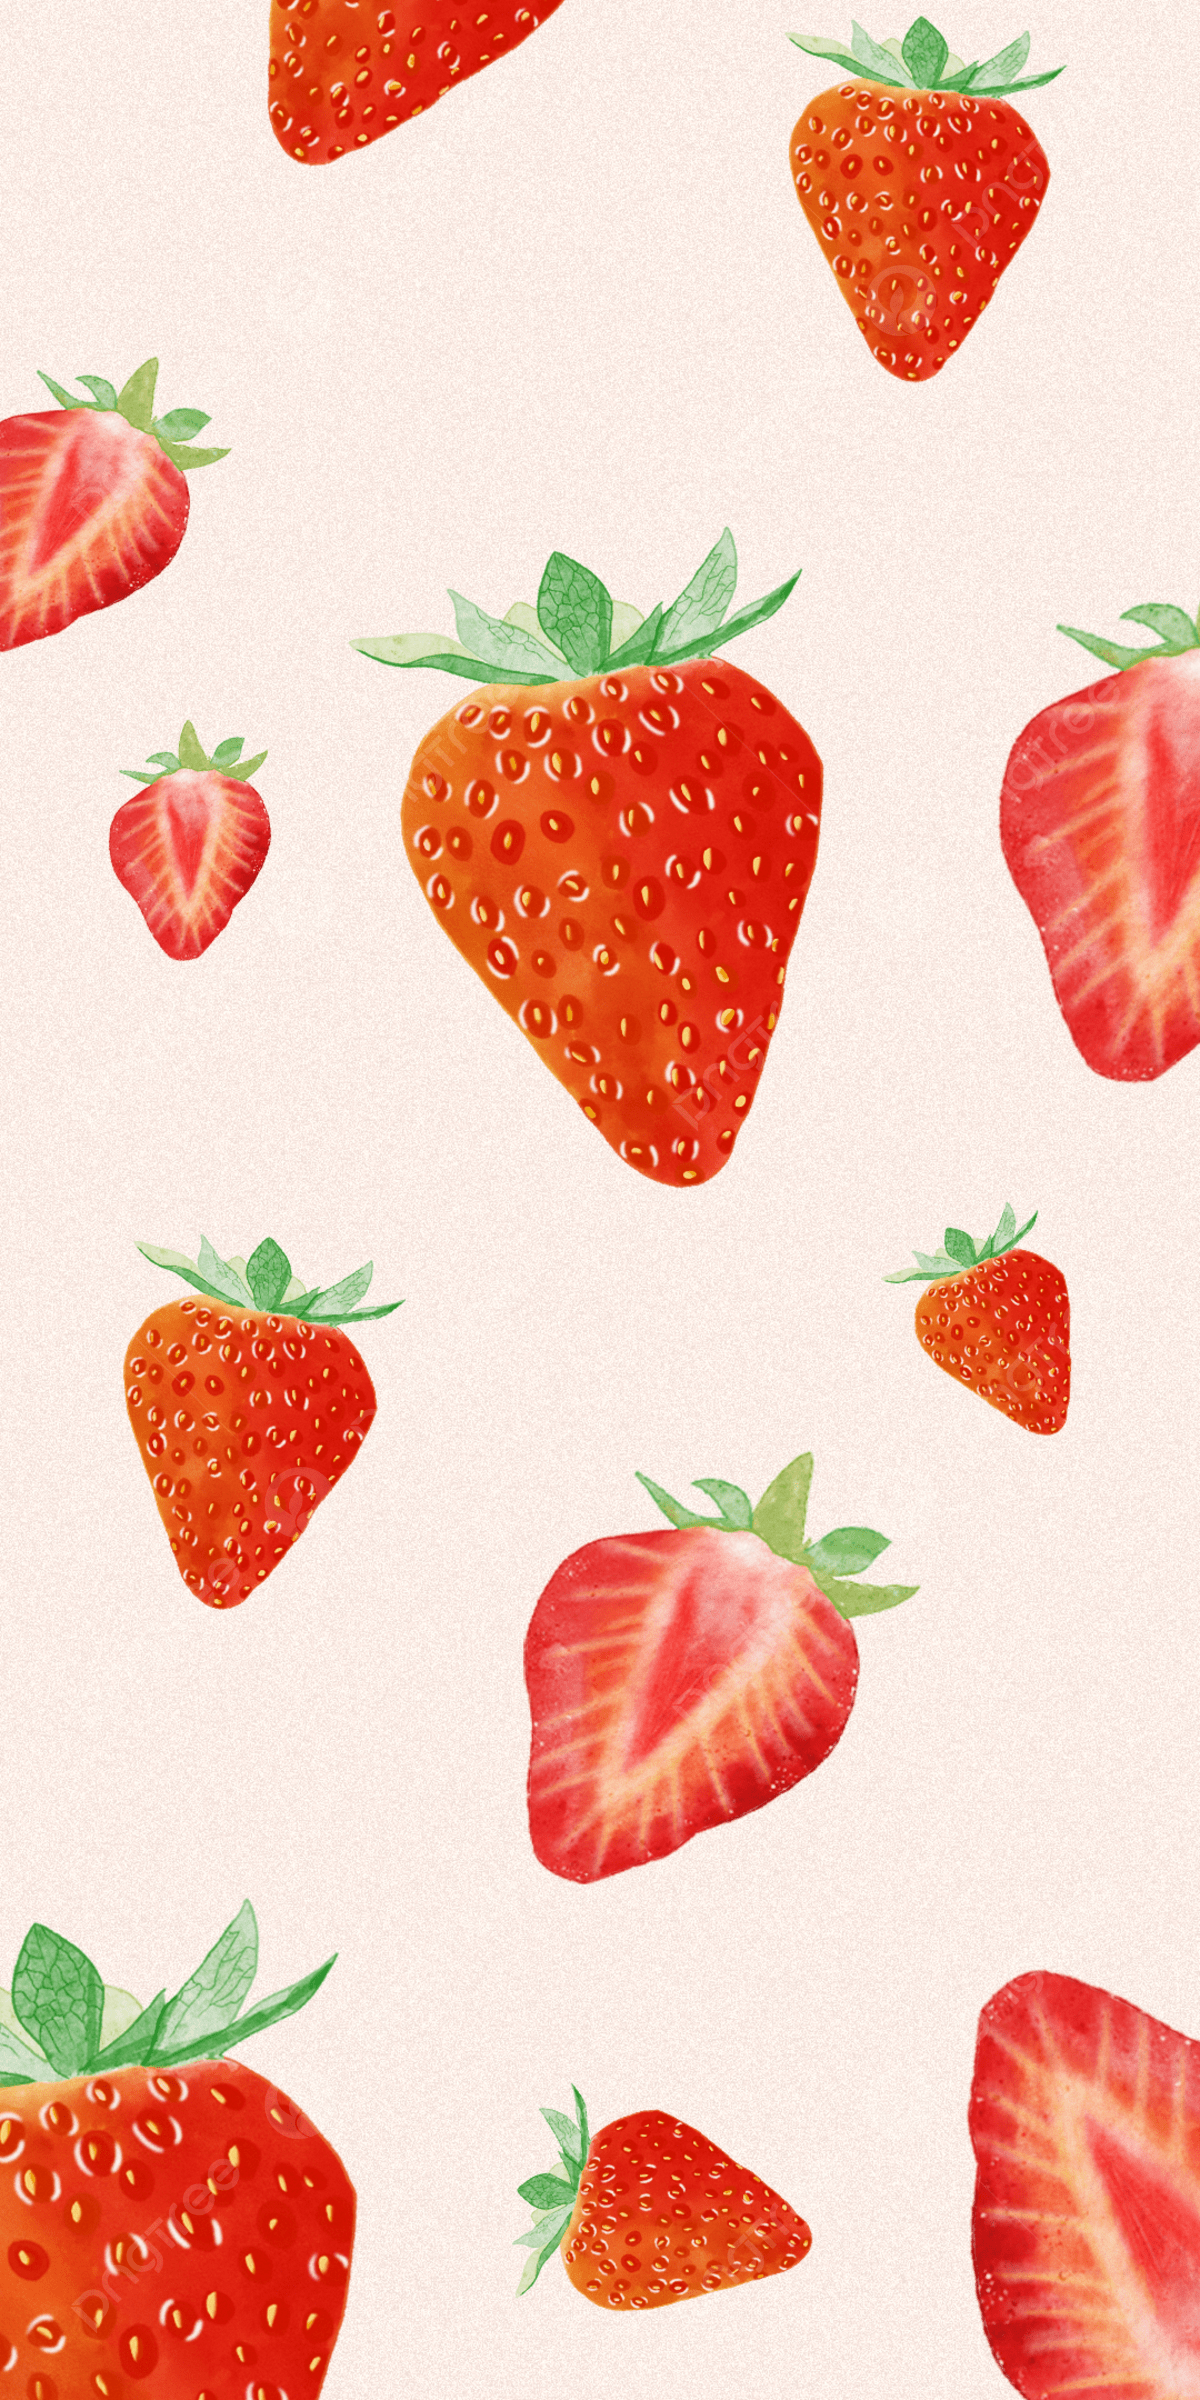 Fruit Wallpaper Watercolor Strawberry Background Wallpaper Image For Free Download